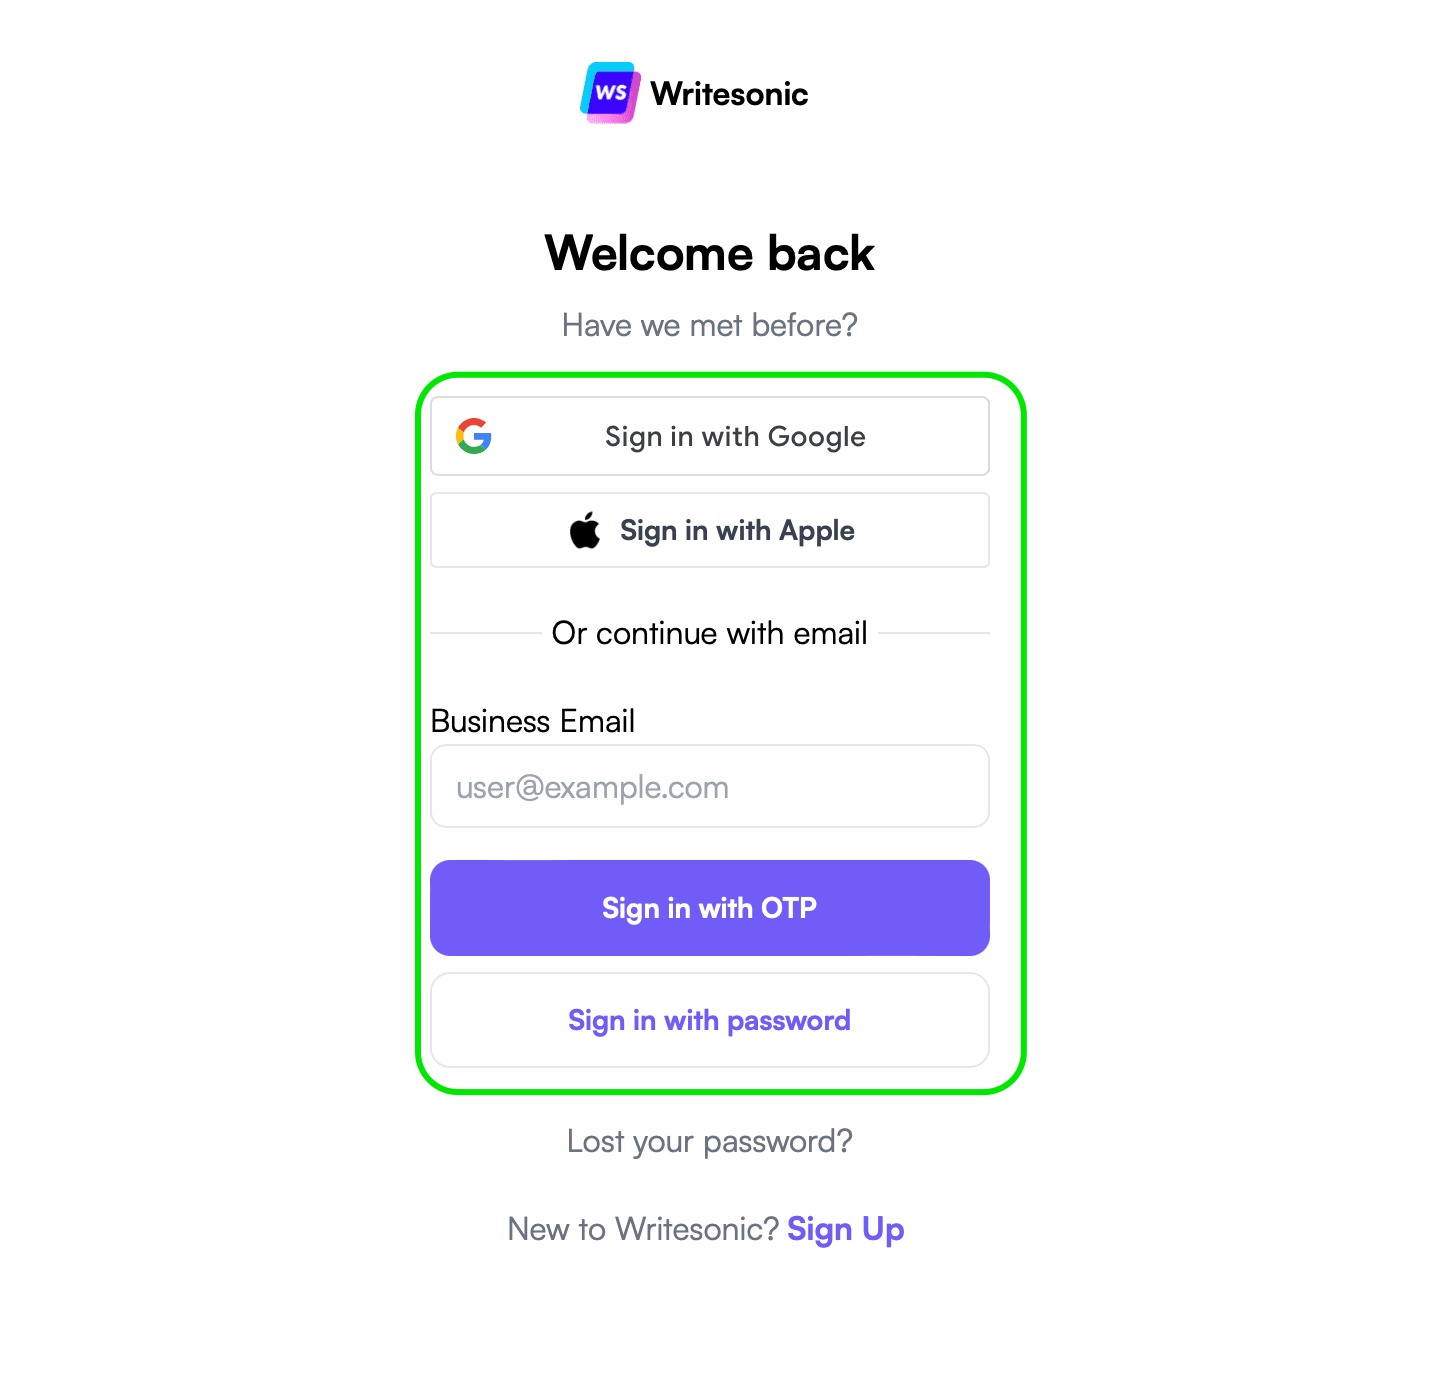 A screenshot showing Writesonic’s user signup interface.